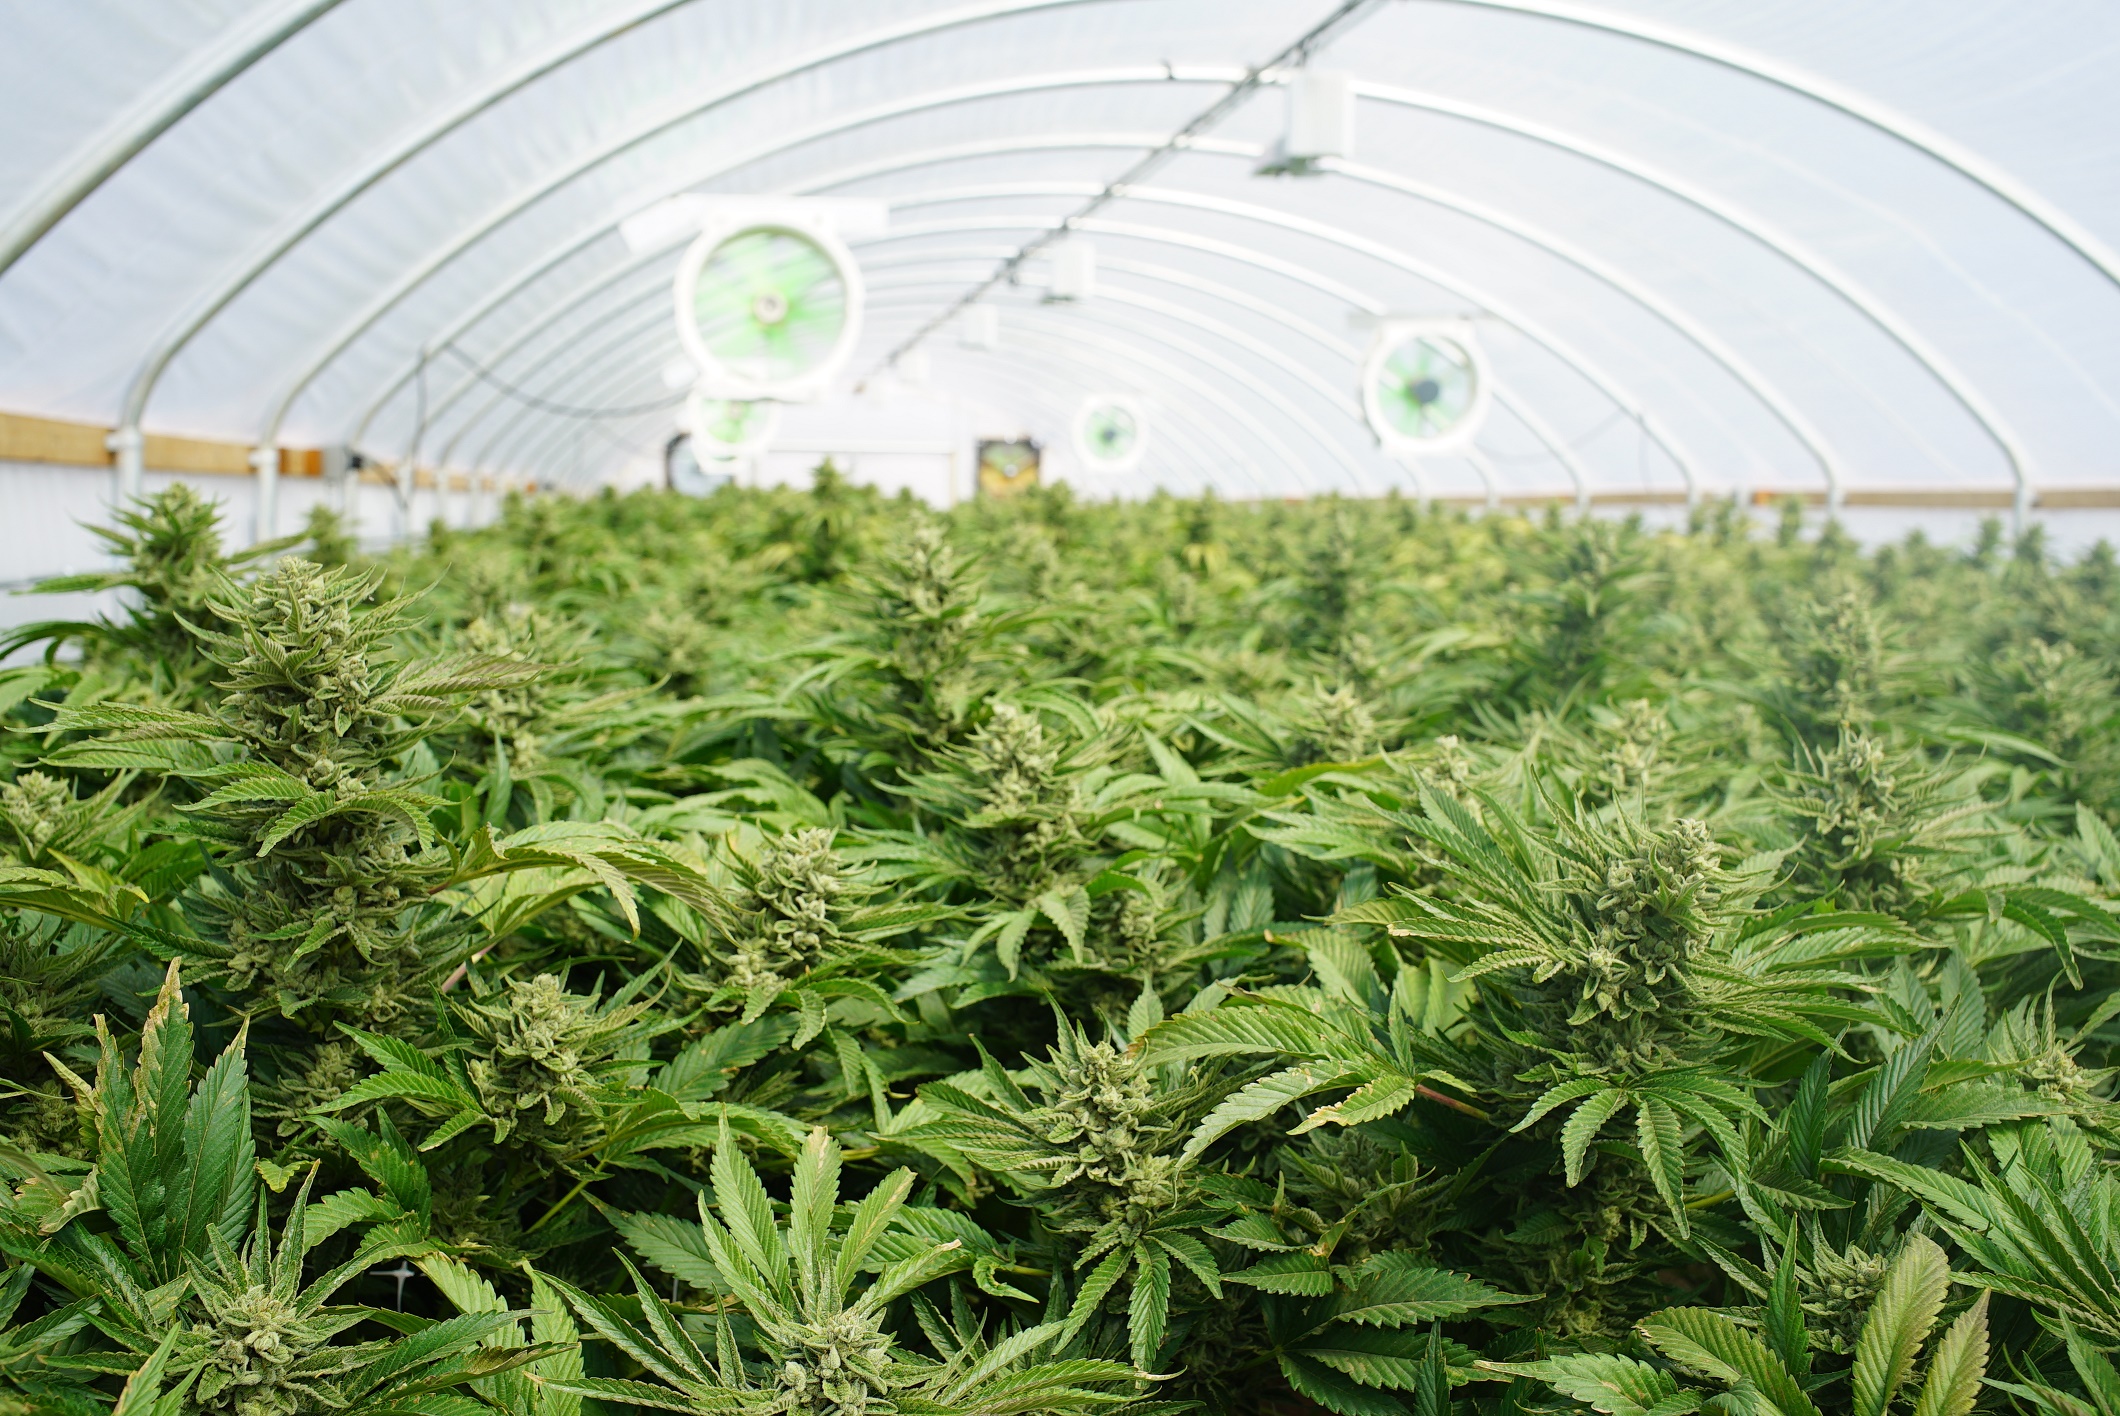 Why Canopy Growth Corp. (TSX:WEED) Will Not Be Dethroned by Aurora Cannabis Inc. (TSX:ACB)